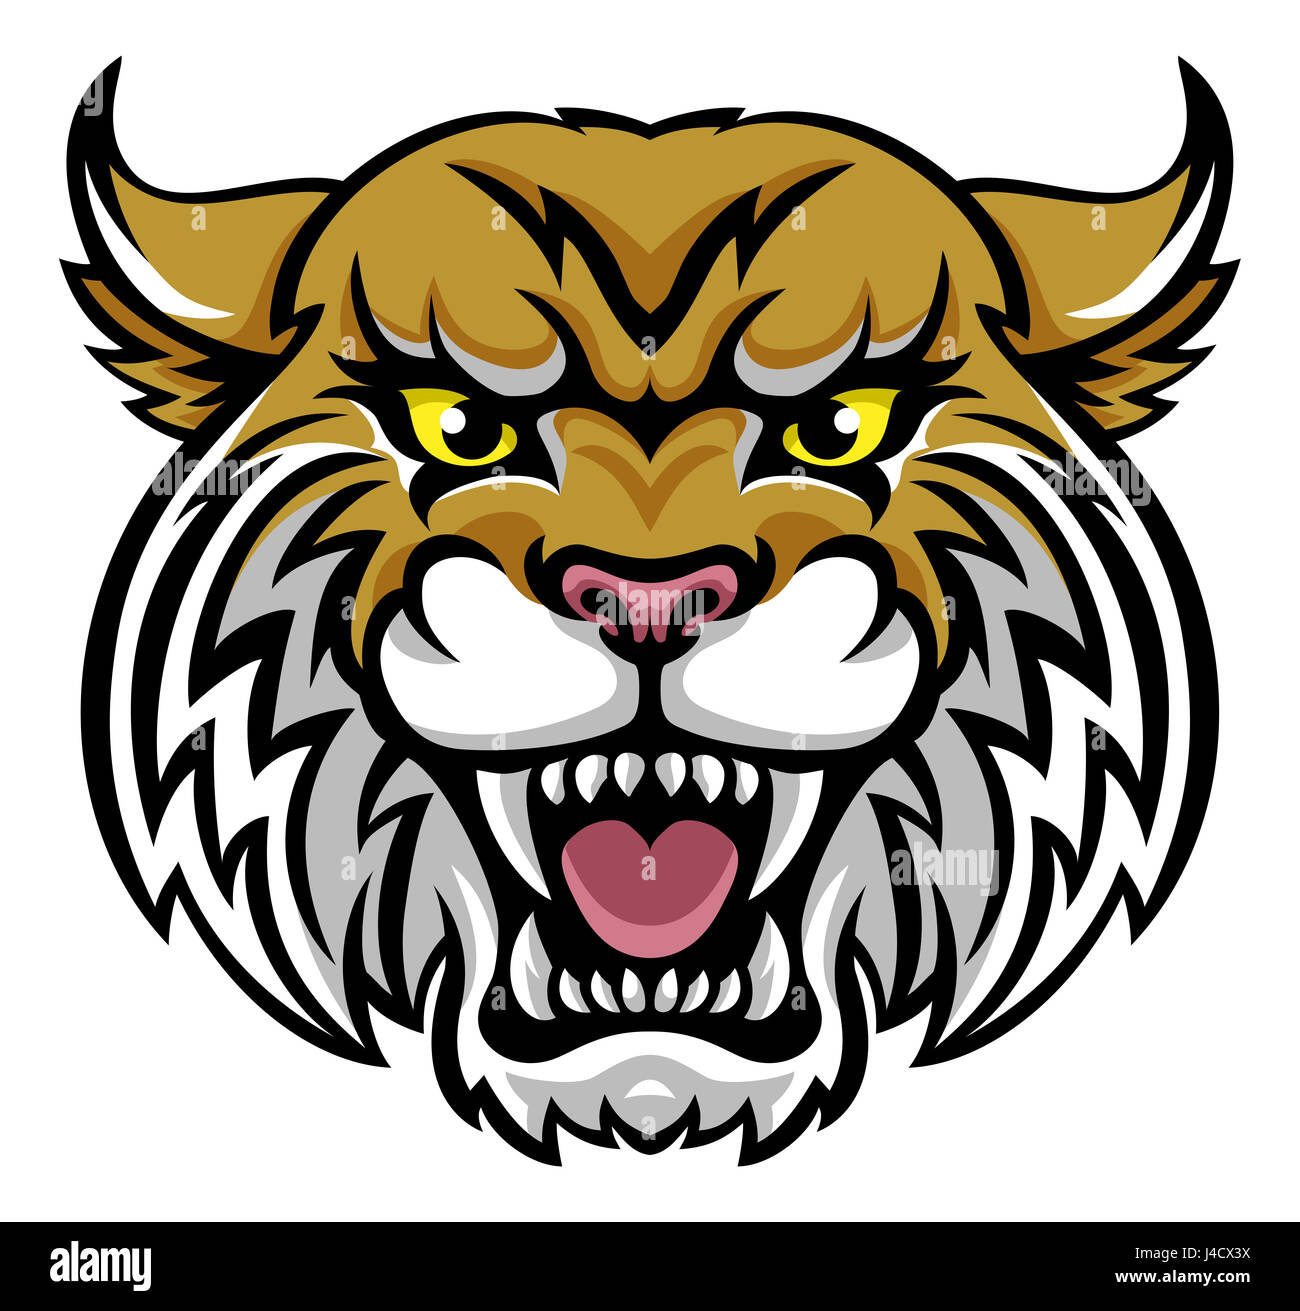 An angry looking wildcat or bobcat mascot animal character Stock Photo